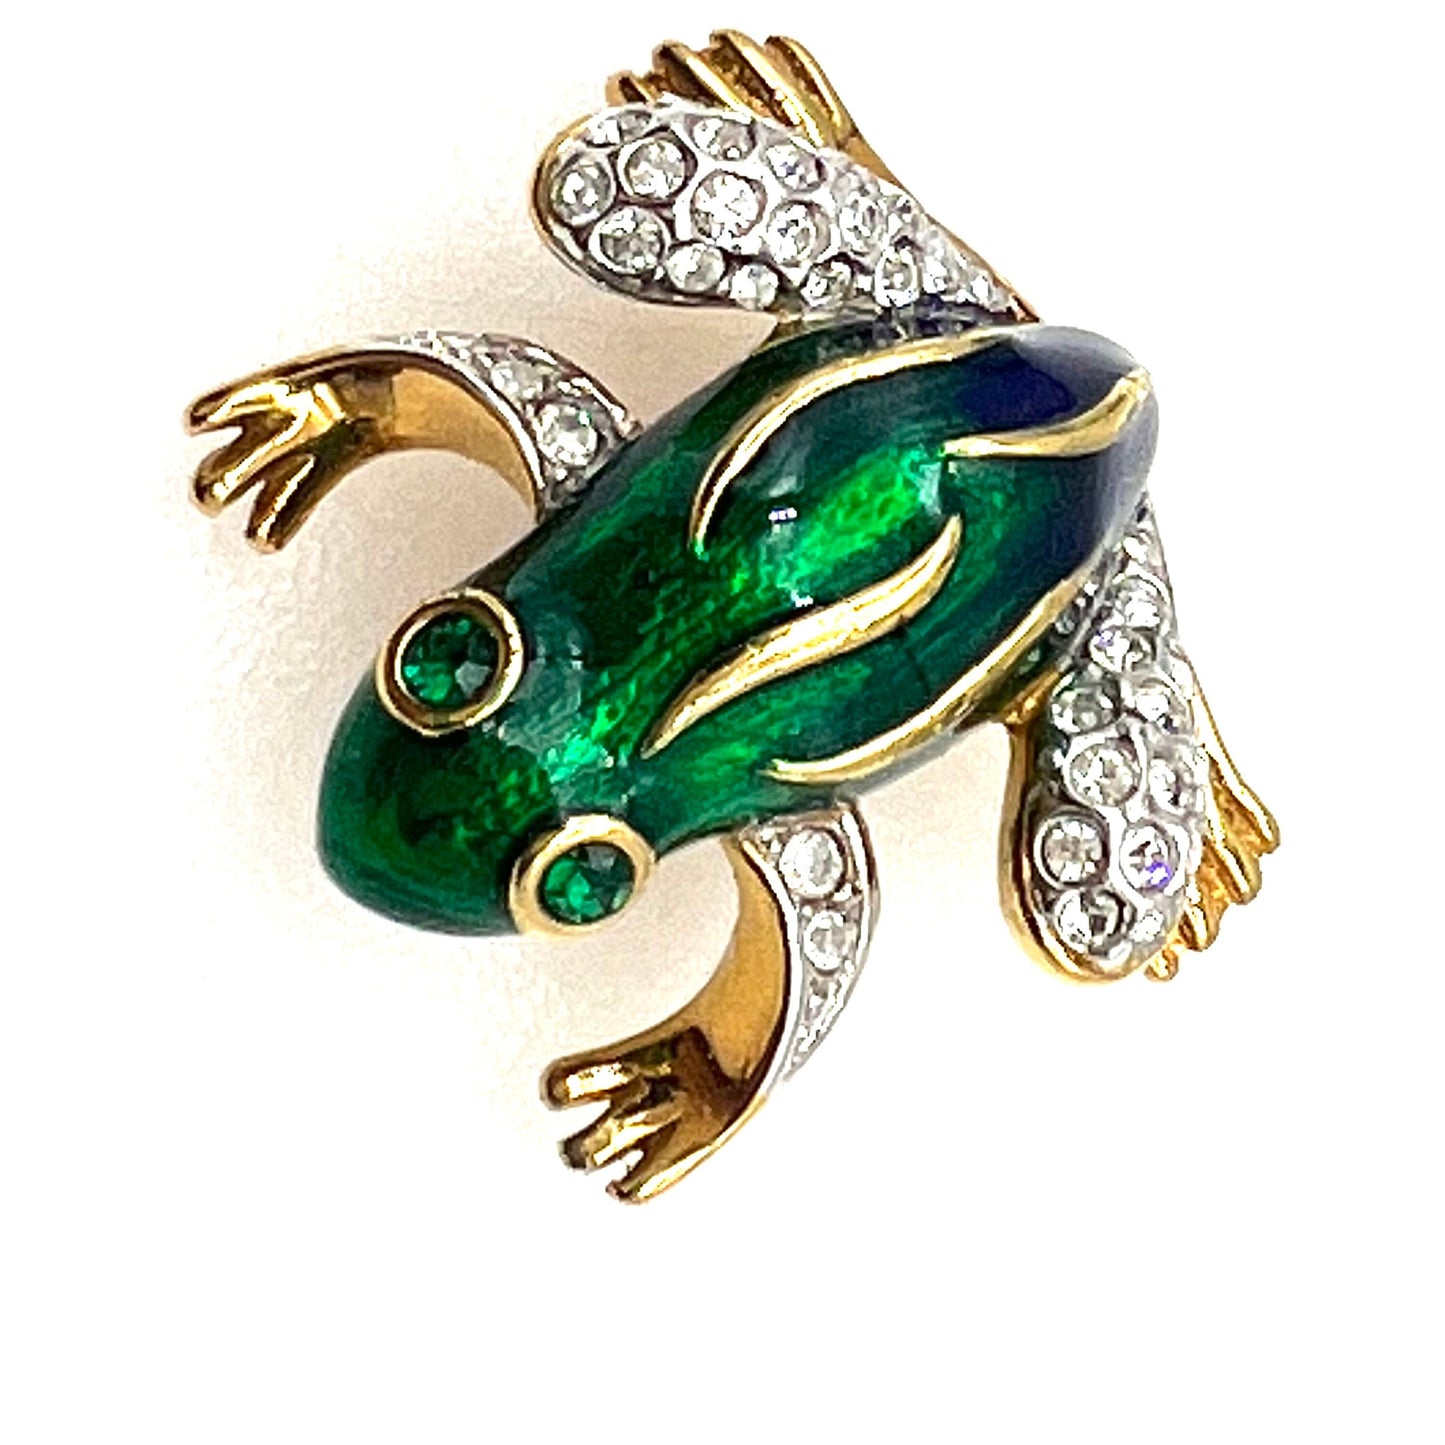 Attwood and Sawyer 22ct Gold Plated Swarovski Crystal and Enamel Frog Brooch